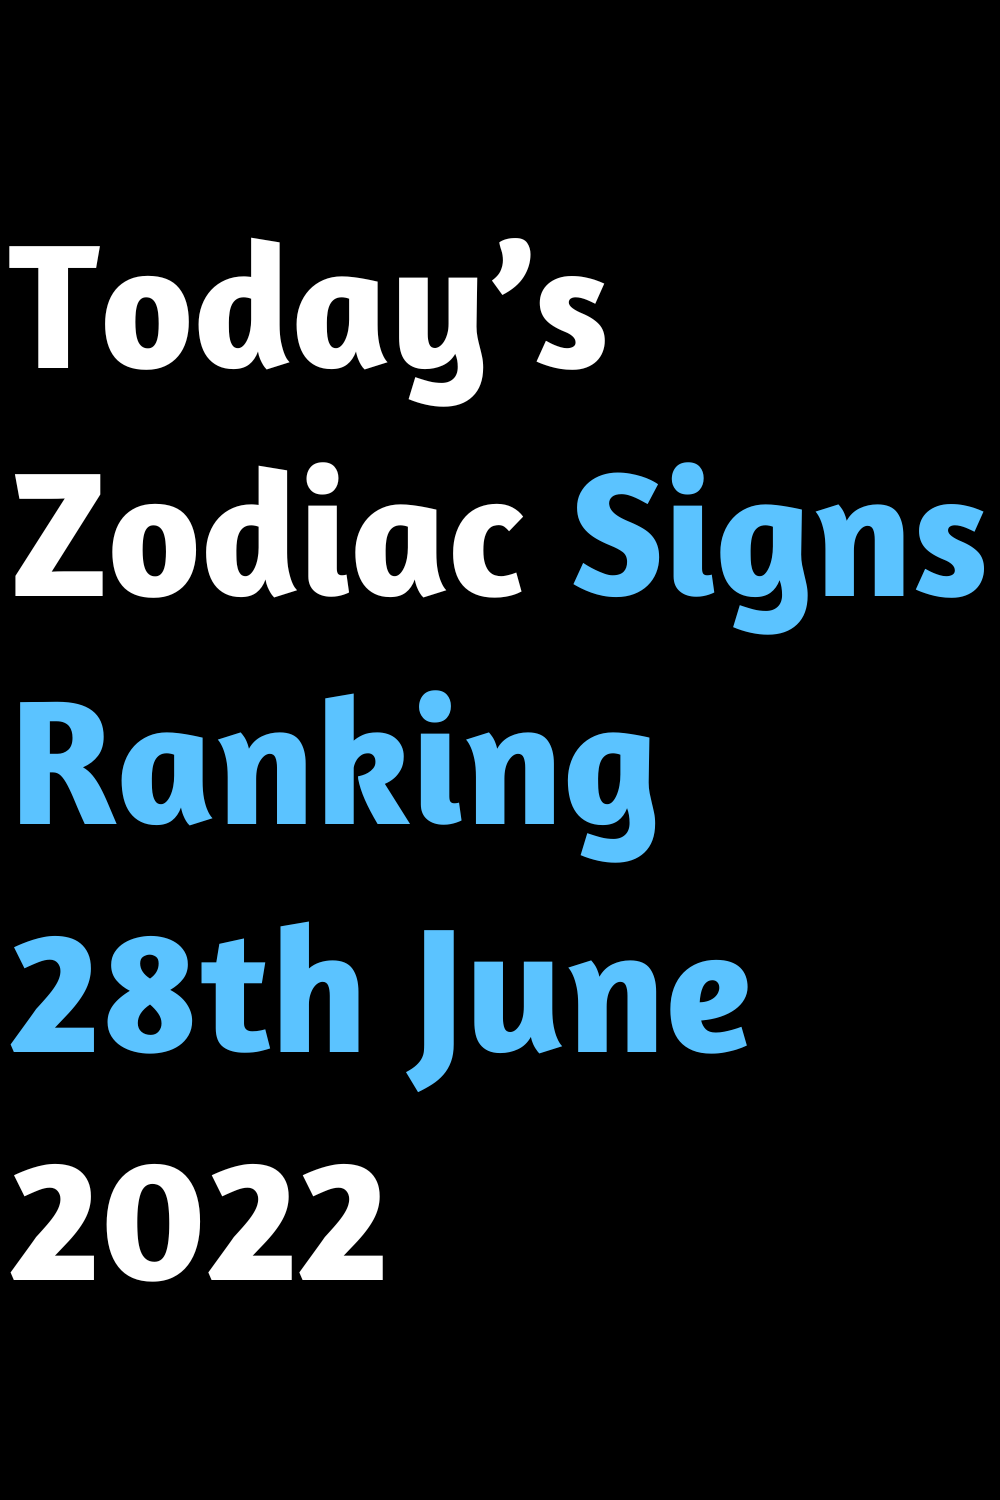 Today’s Zodiac Signs Ranking 28th June 2022